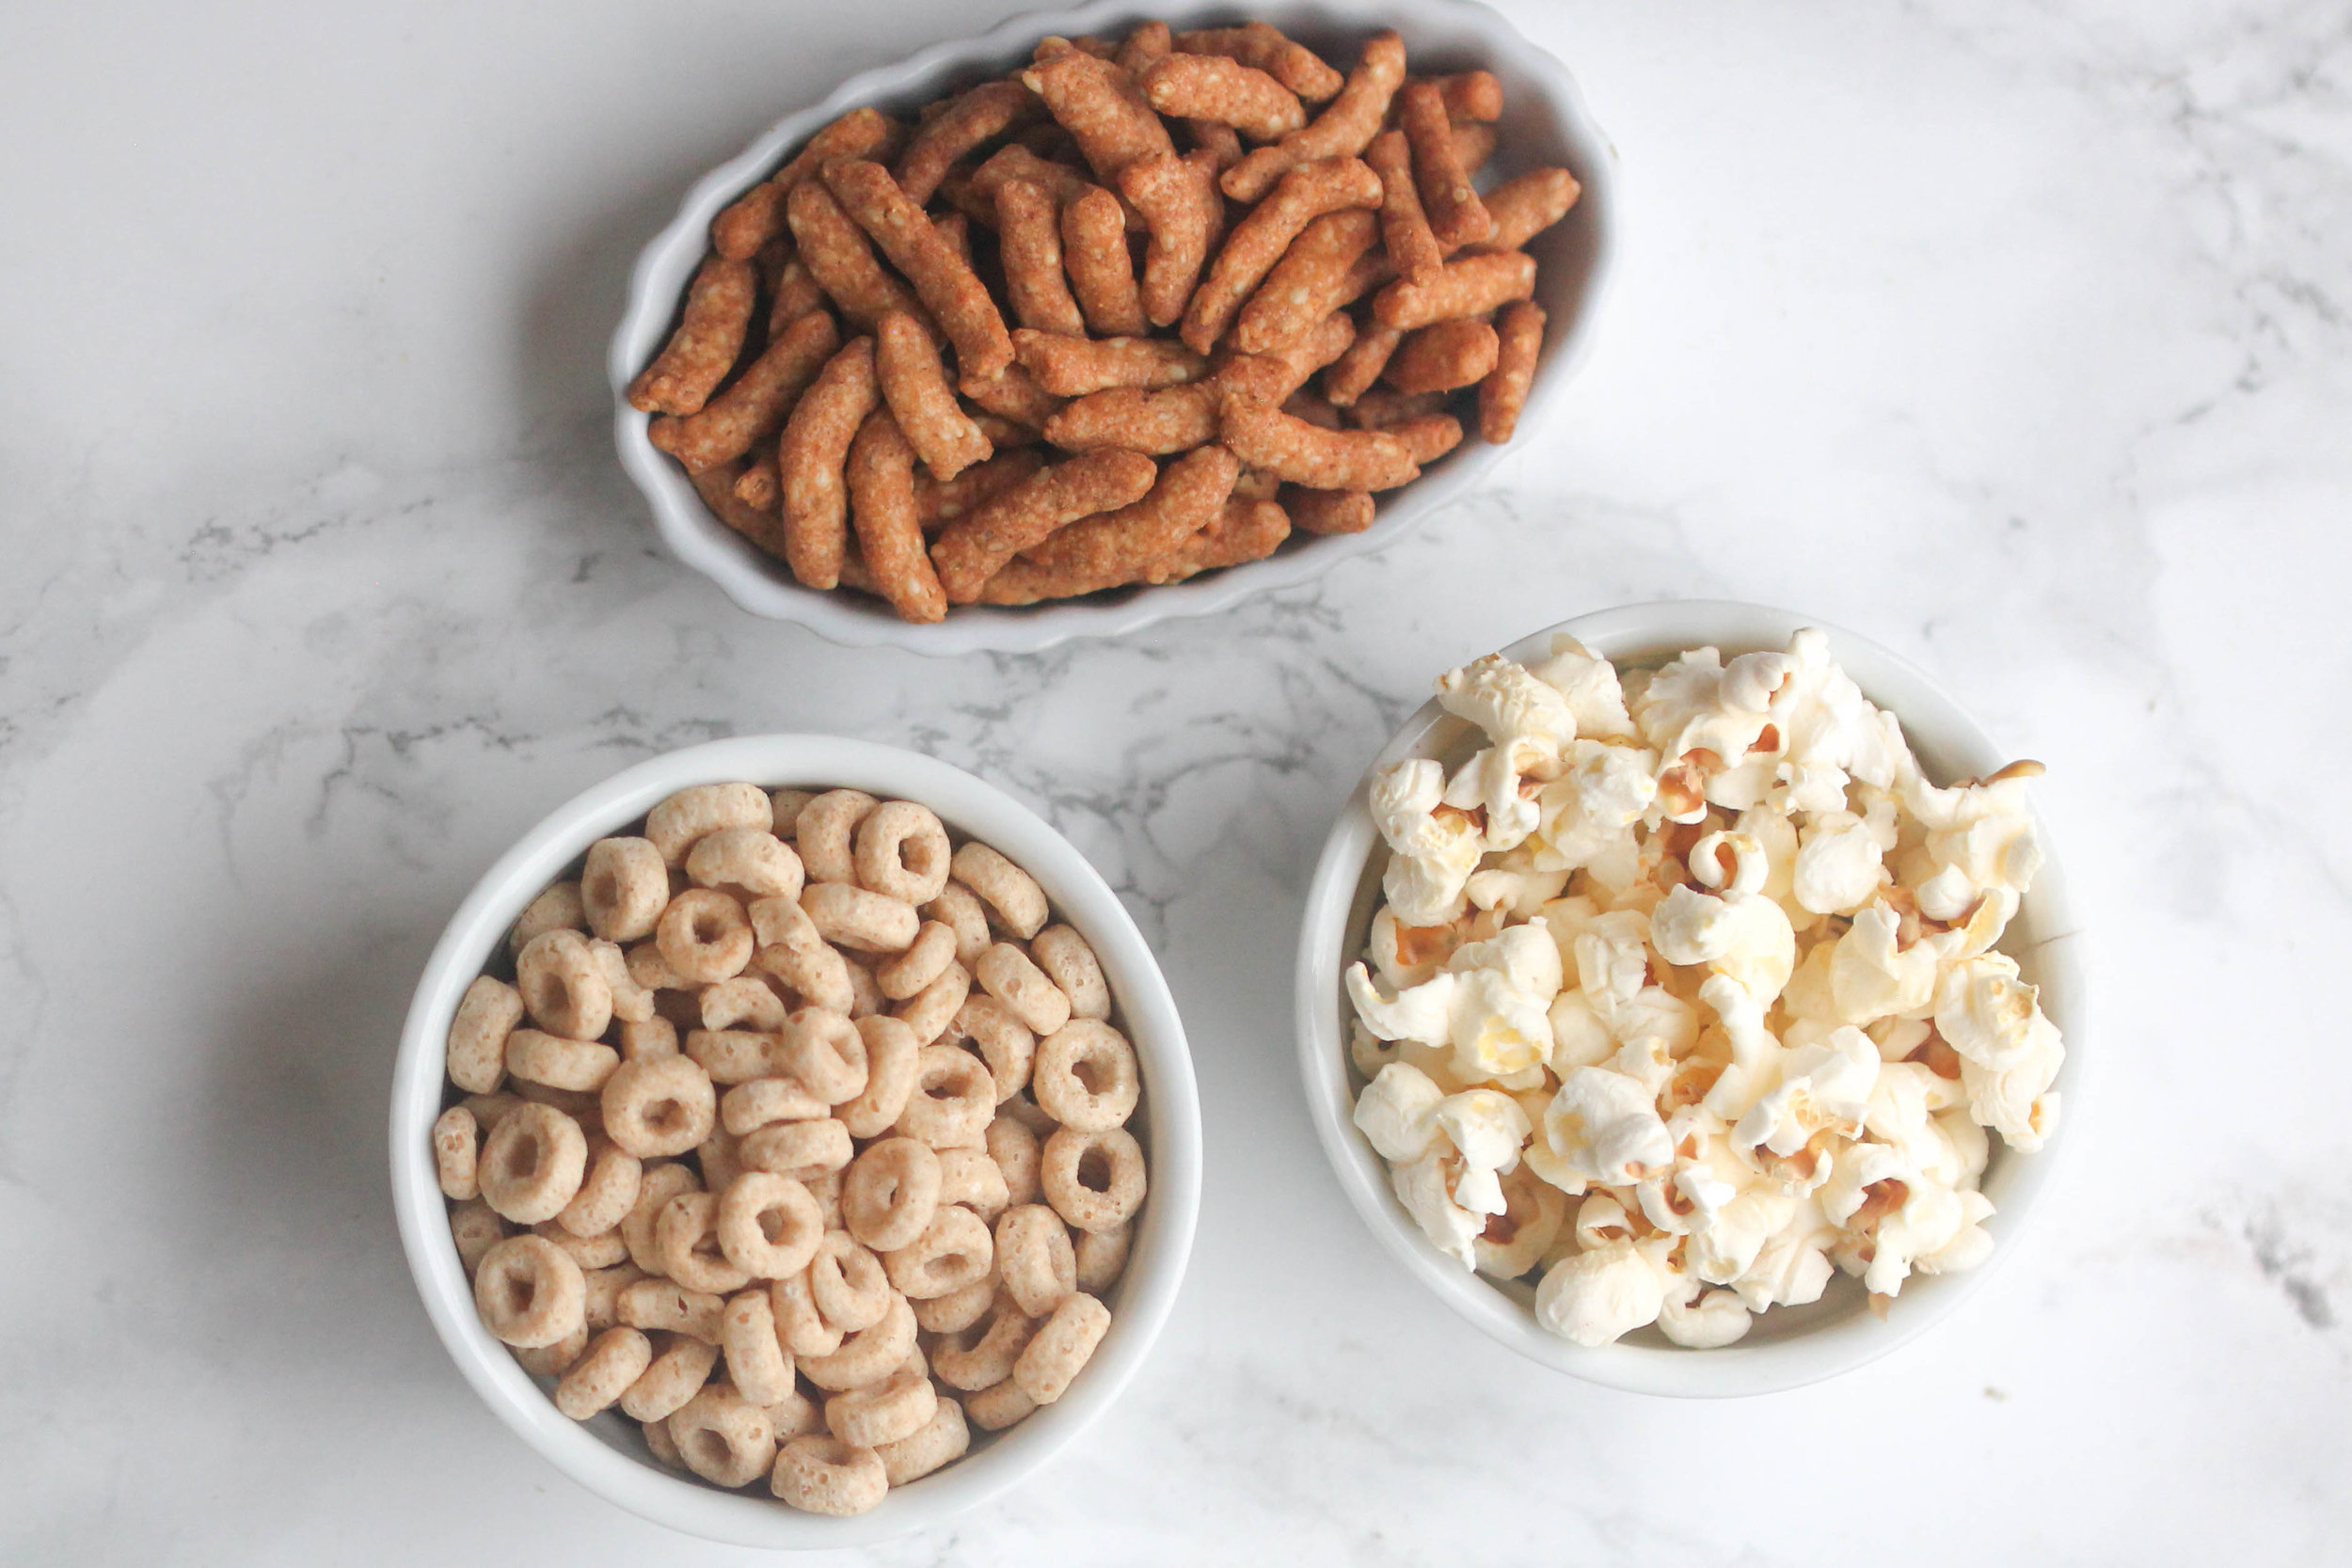 Learn how to build a healthy DIY trail mix! Sharing what to include & how to customize your trail mix to suit your needs.